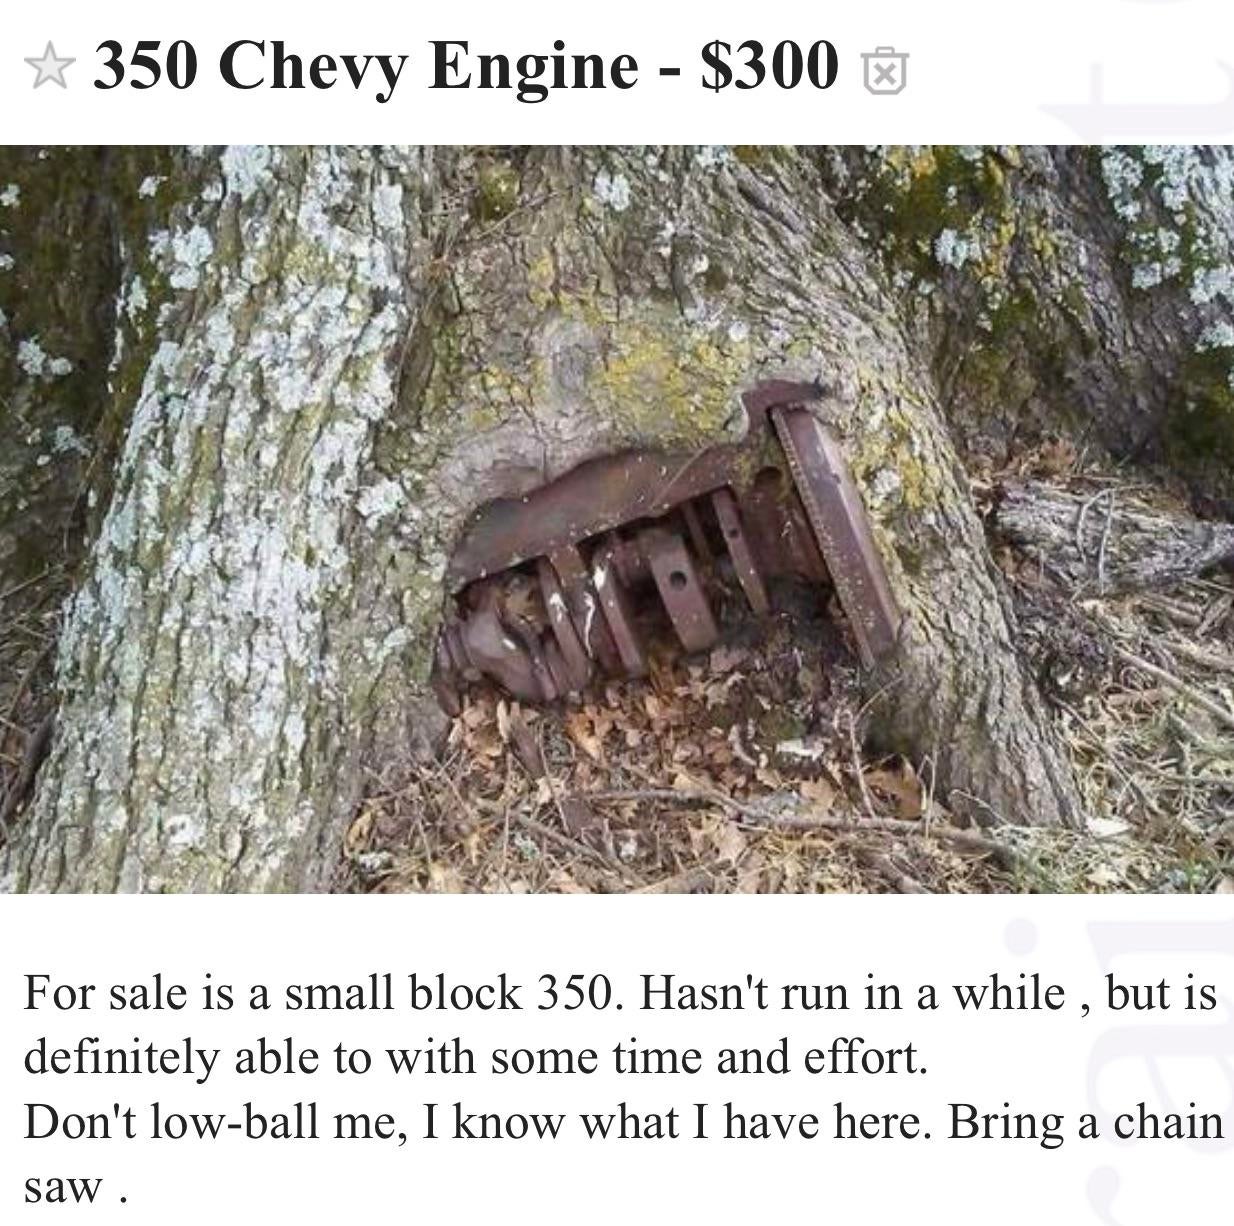 tree - $ 350 Chevy Engine $300 For sale is a small block 350. Hasn't run in a while , but is definitely able to with some time and effort. Don't lowball me, I know what I have here. Bring a chain saw.